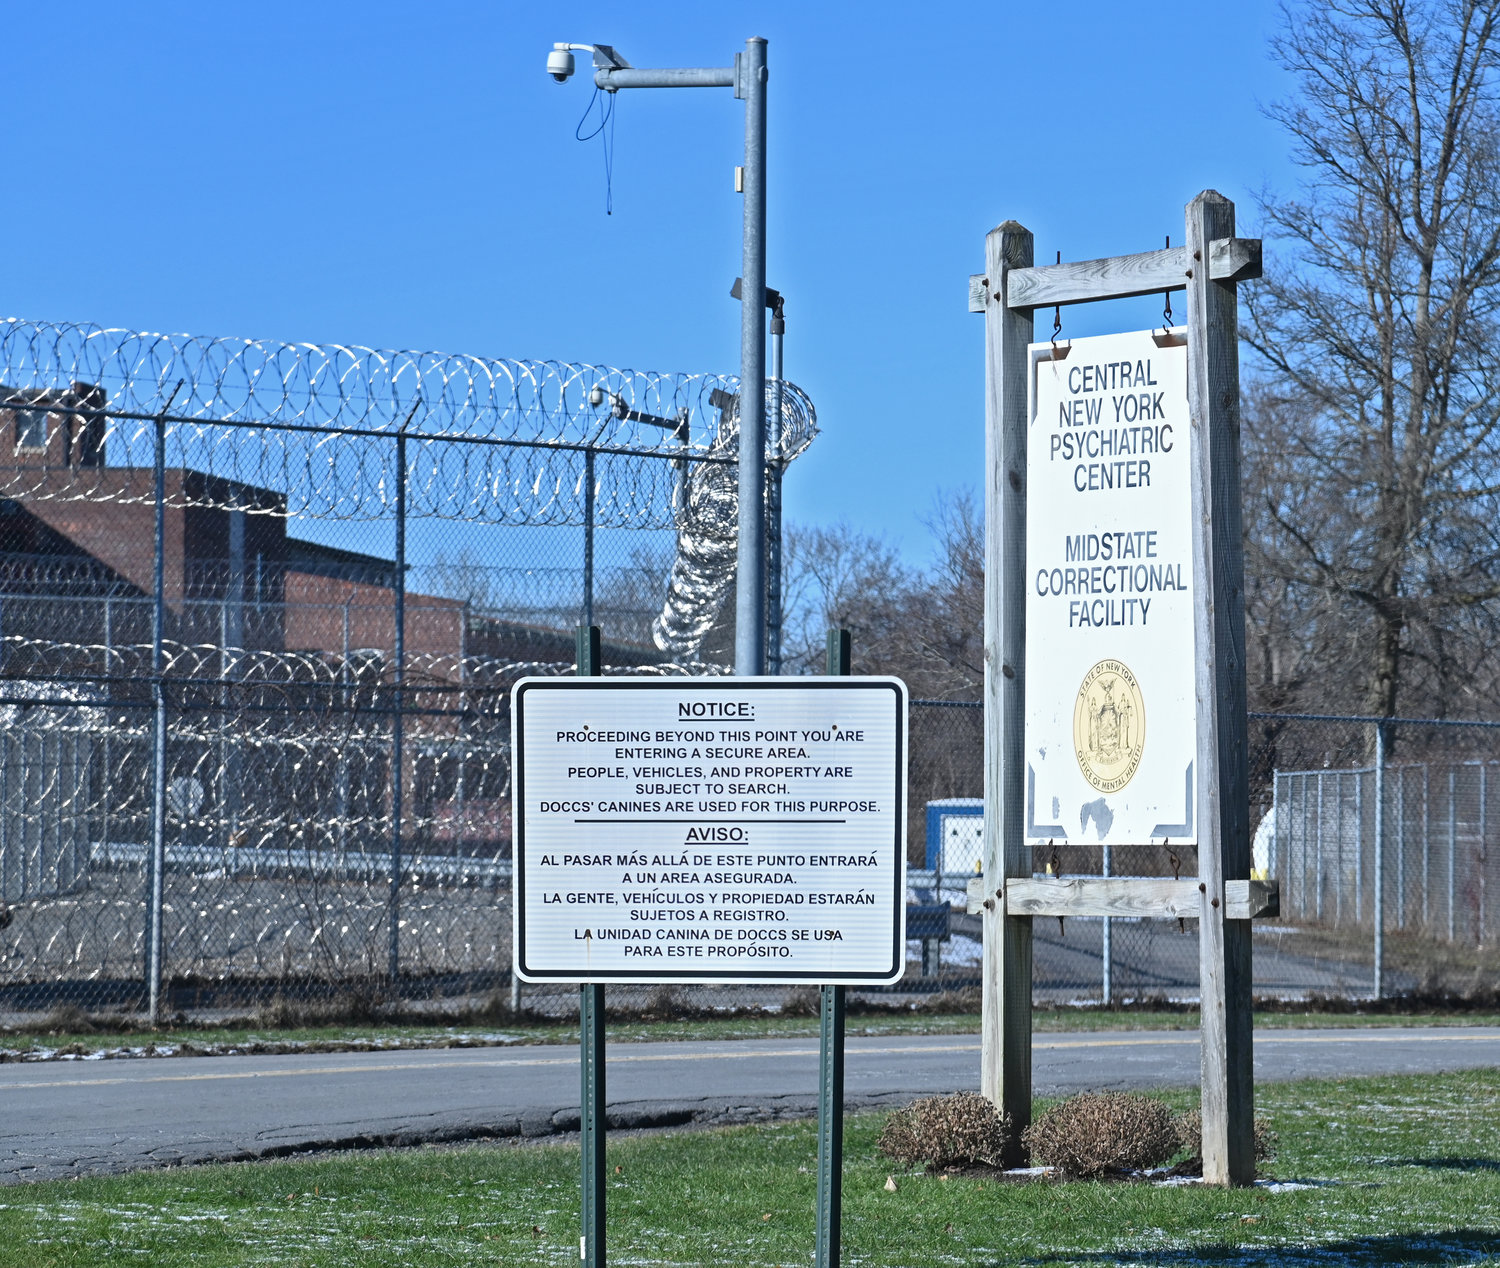 The Central New York Psychiatric Center at Midstate Correctional Facility off Route 291 in Marcy.